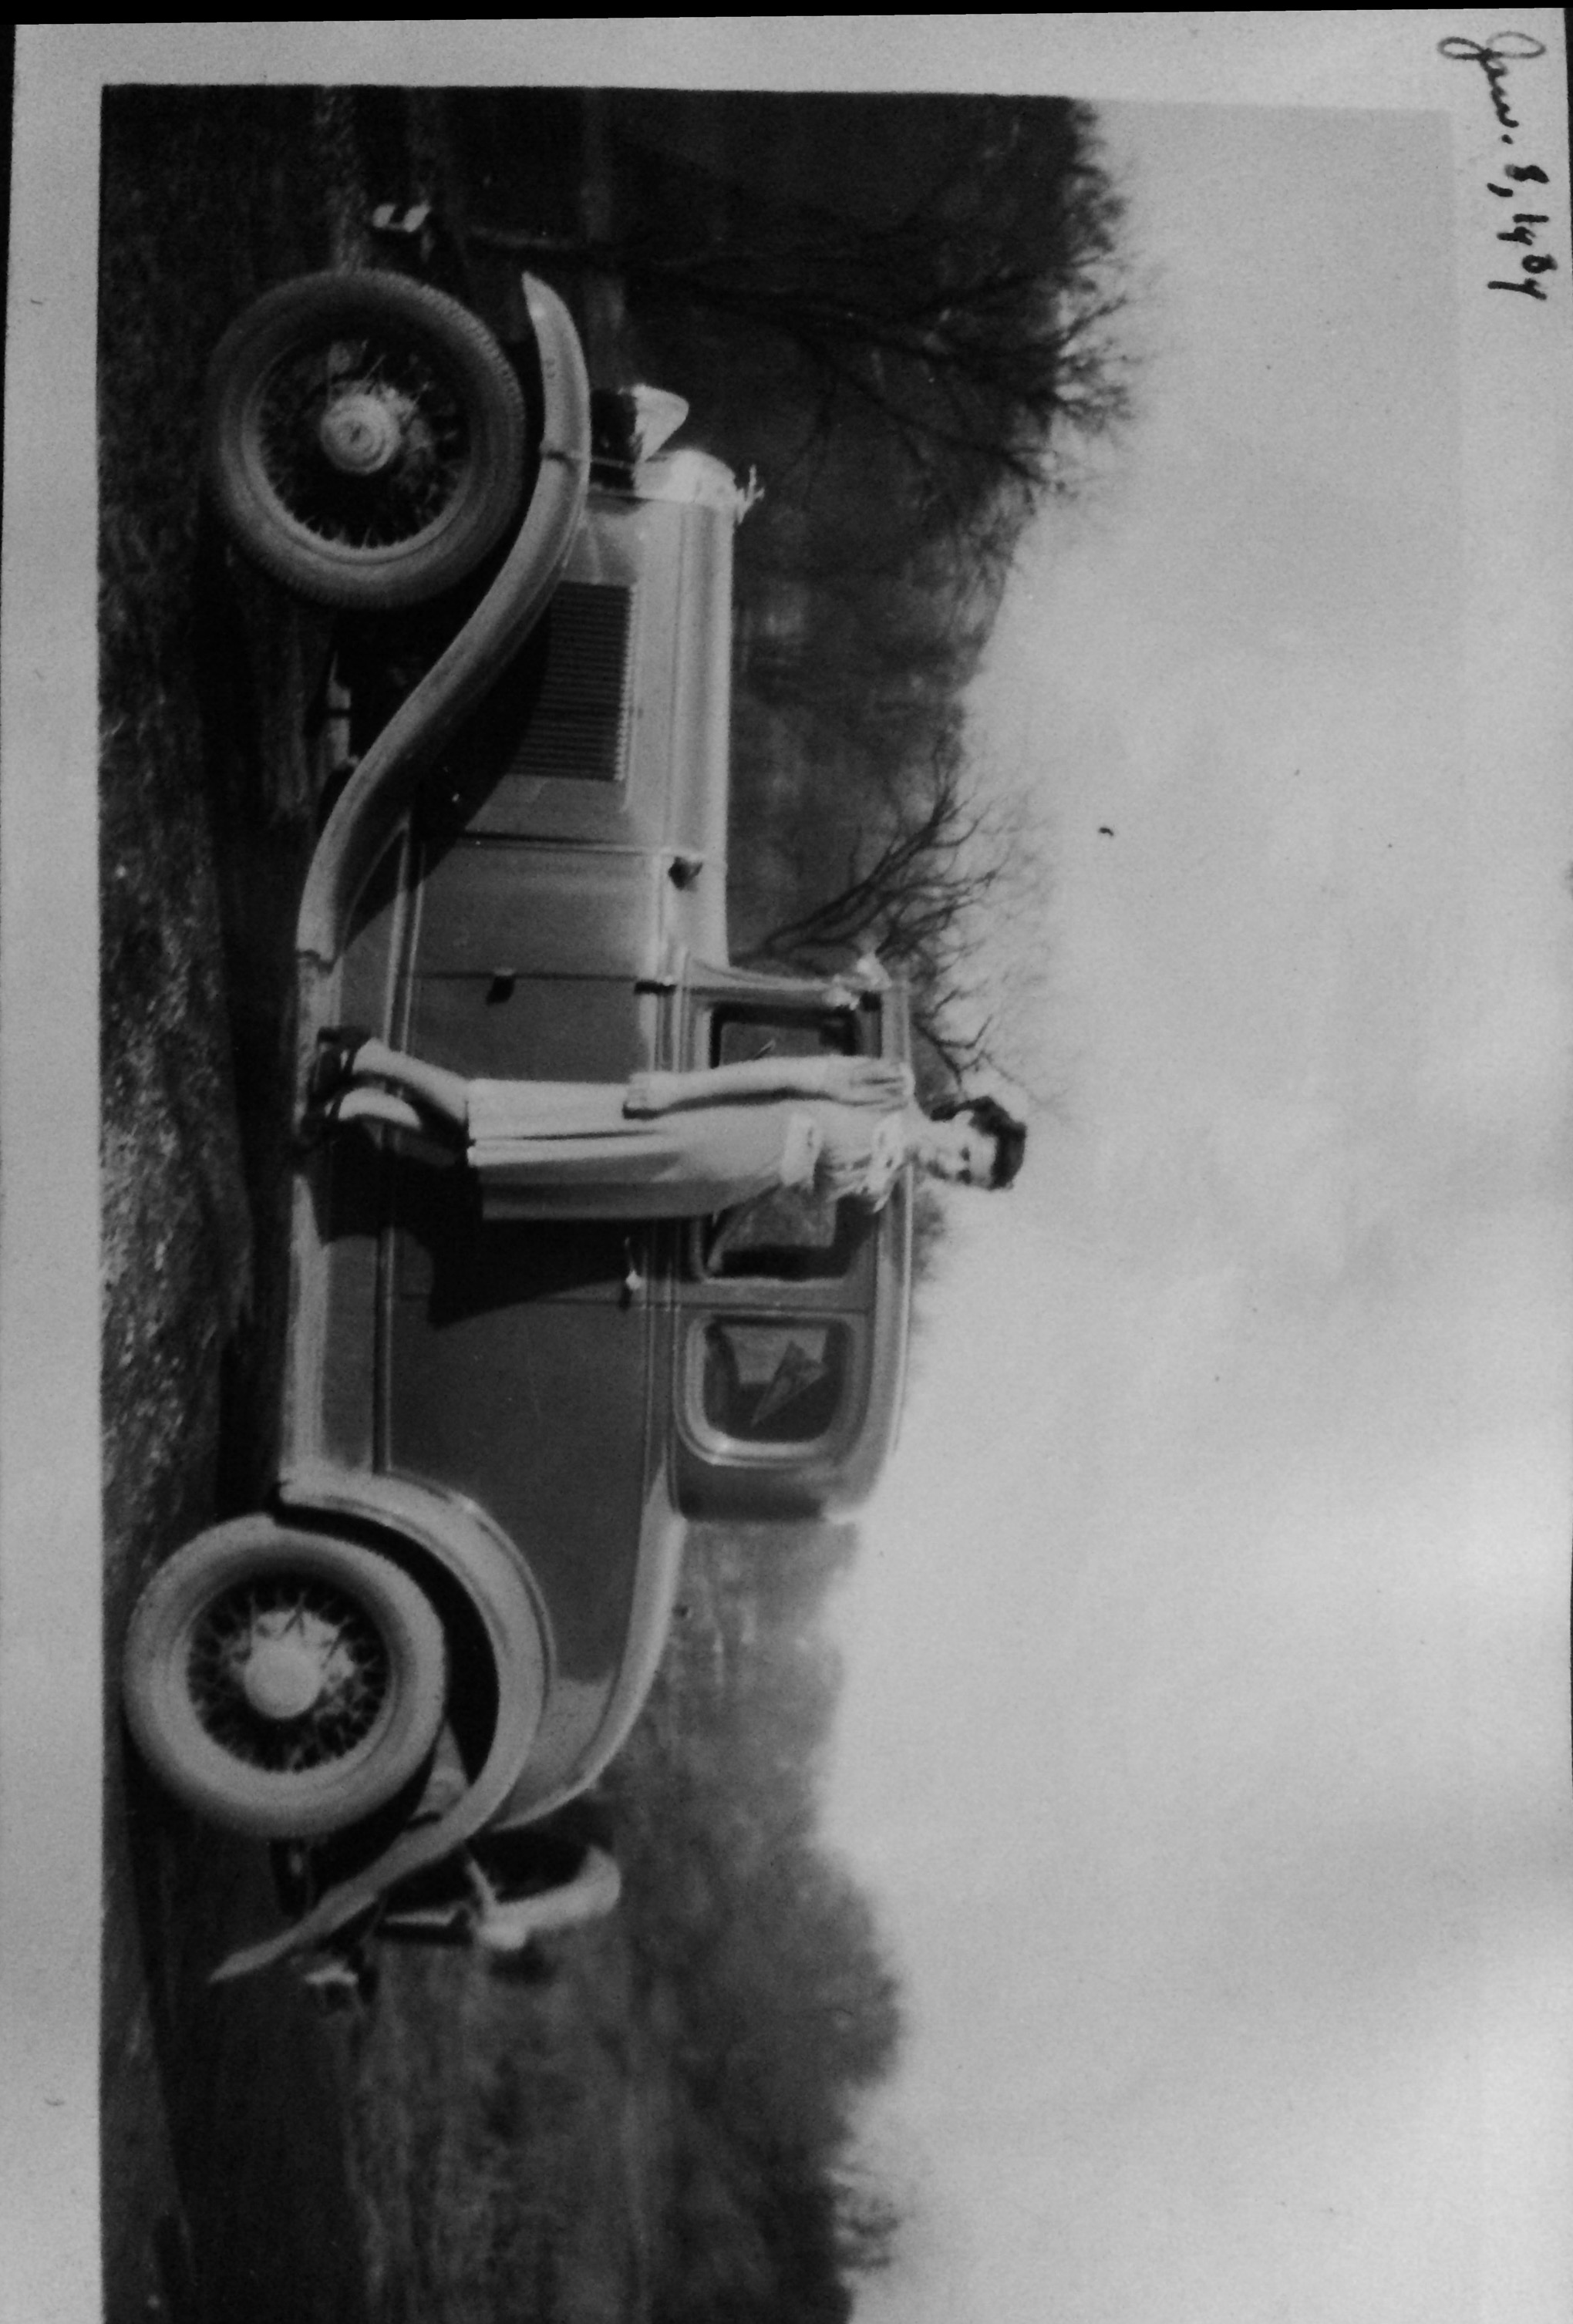 Mom on Dads 1931 Chevy?